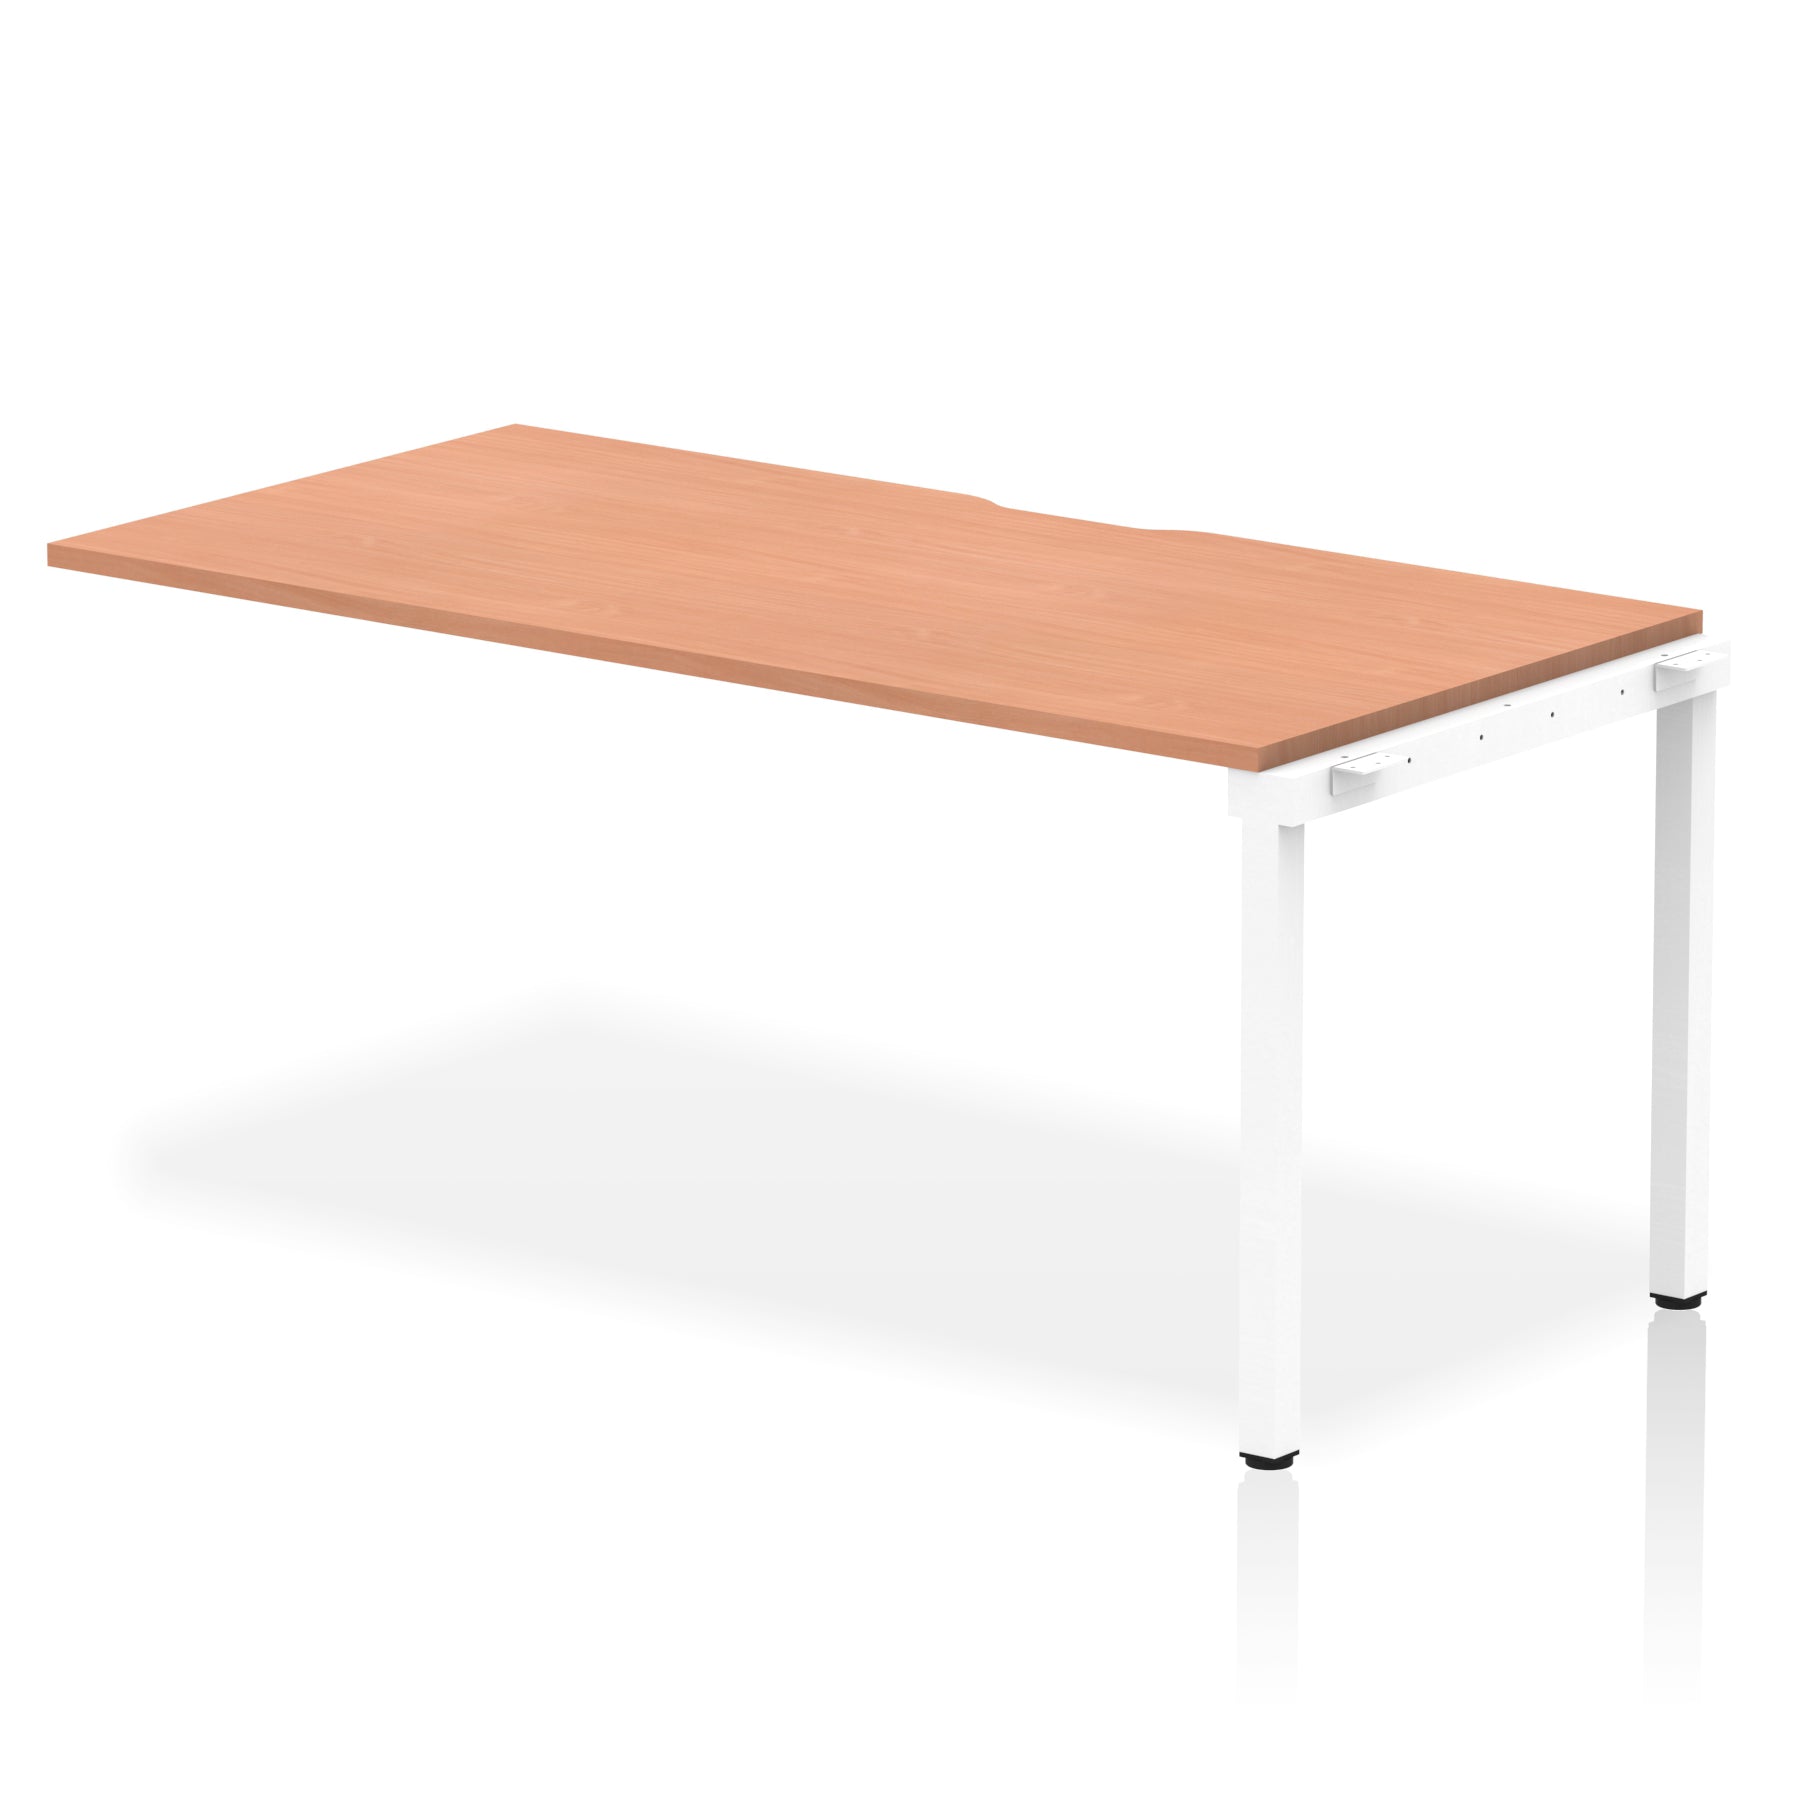 Evolve Plus Single Row Extension Desk - MFC Rectangular, Self-Assembly, 5-Year Guarantee, 1200-1600mm Width, Silver/White Frame, Box Frame Legs